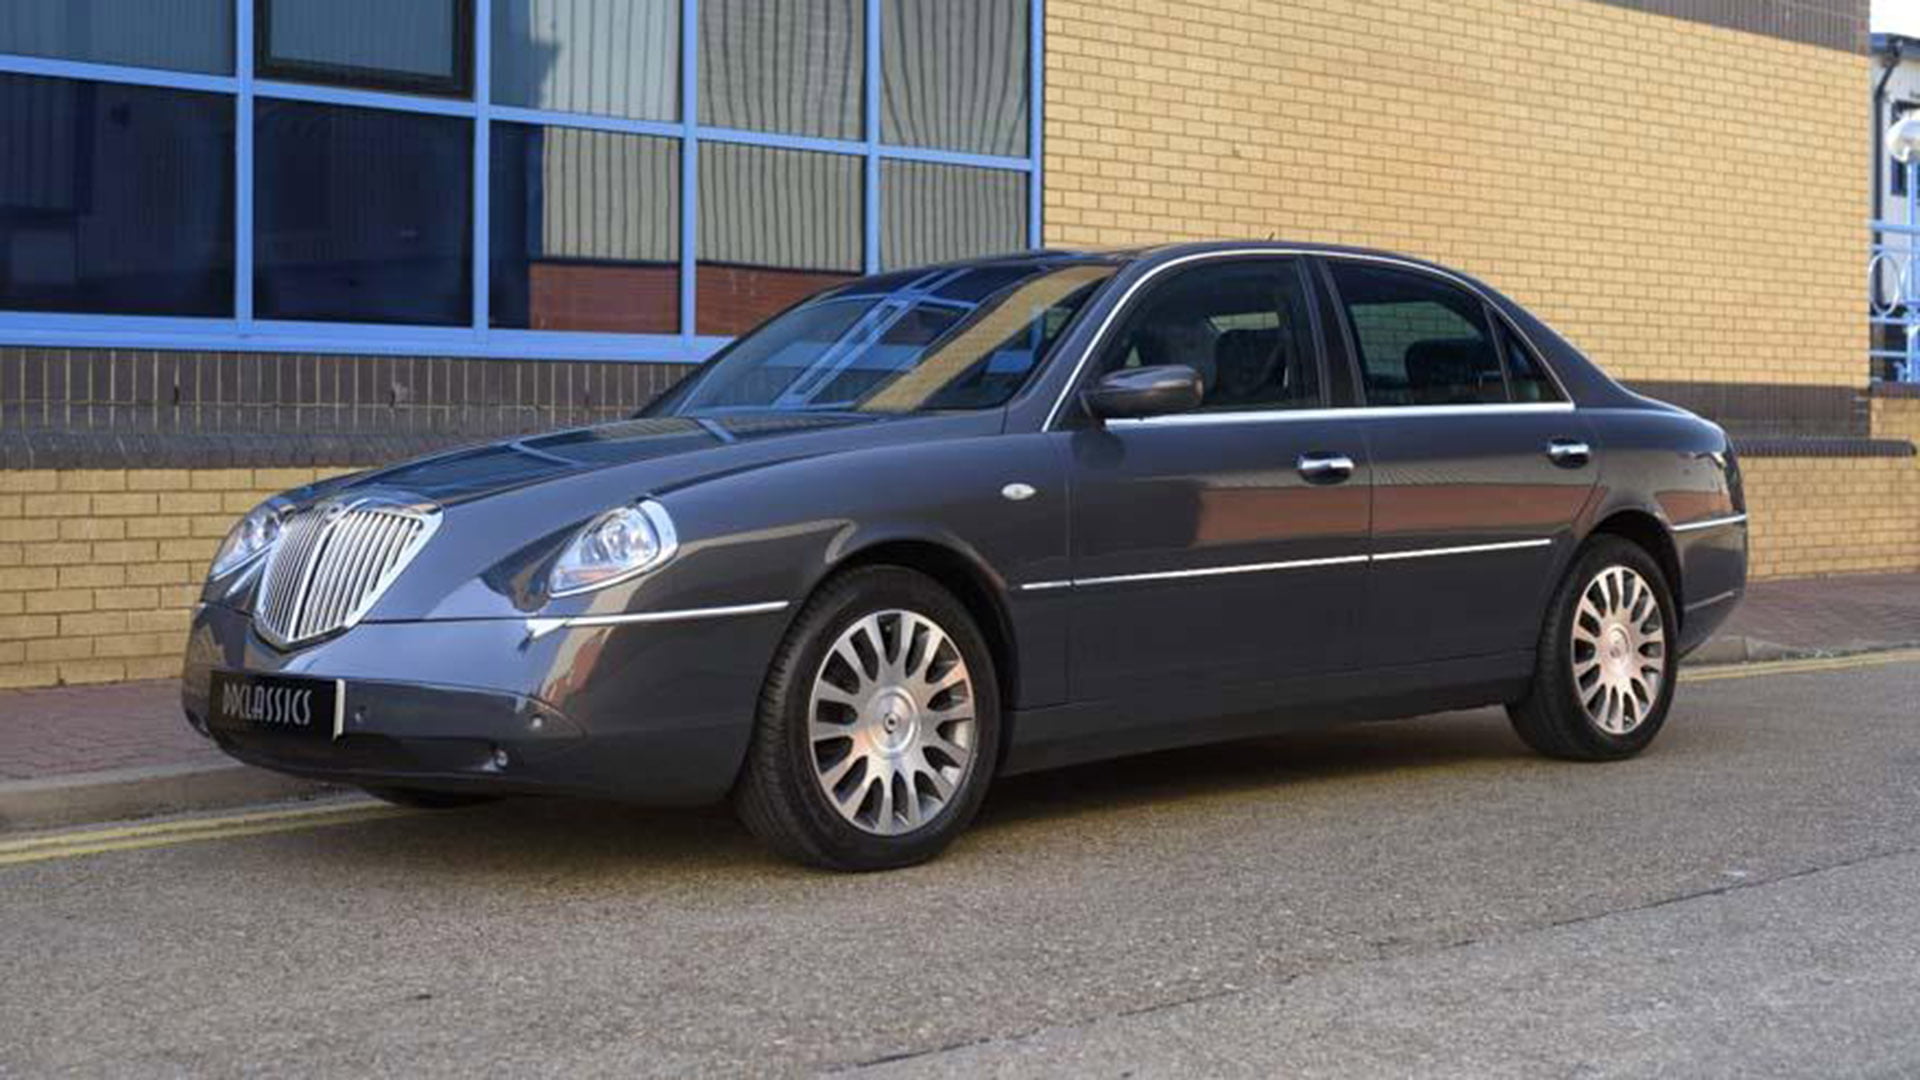 Lancia Thesis for sale in UK